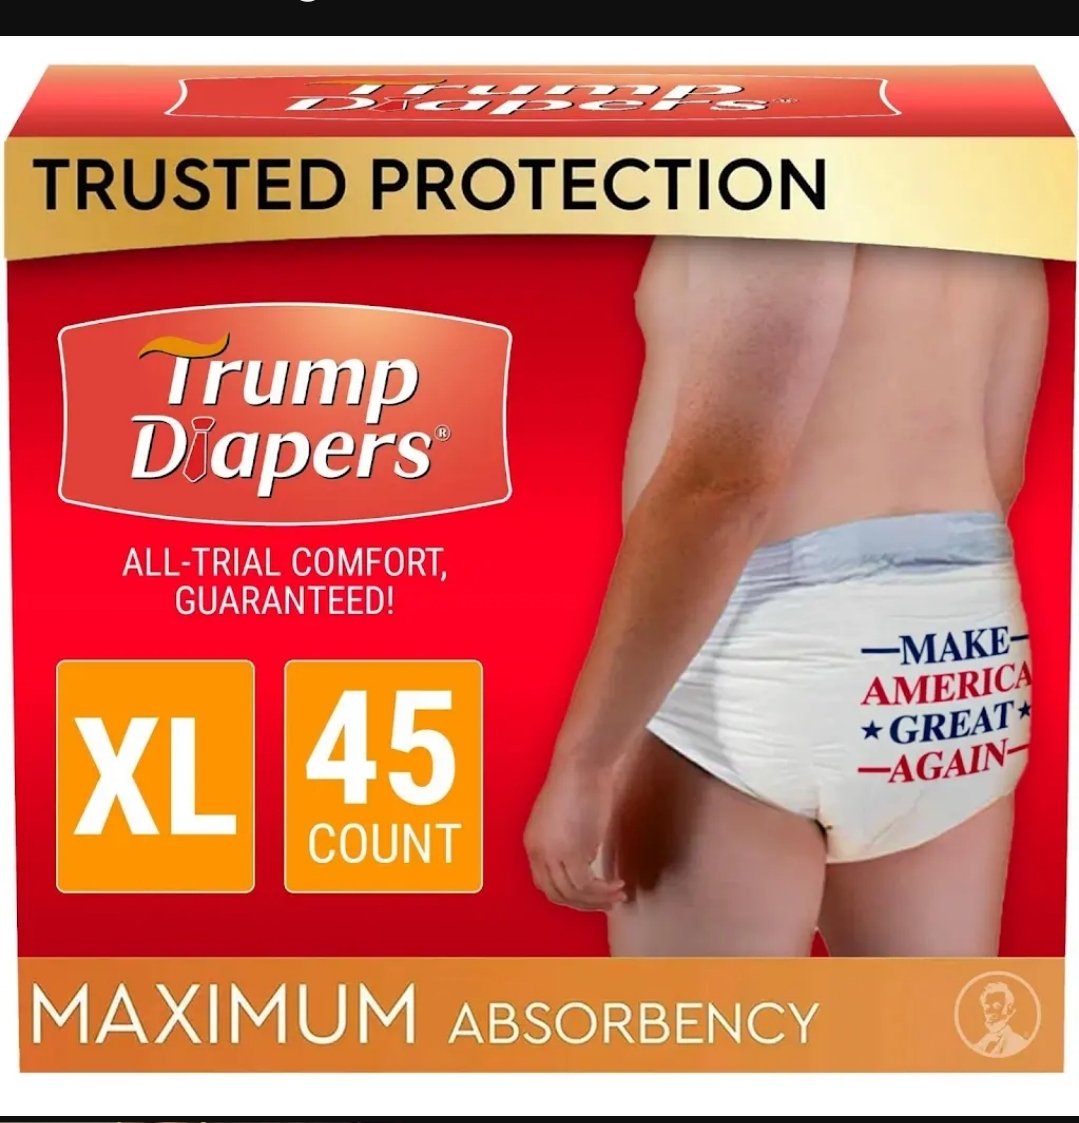 'Trump's Trusted Protection'??
From #Trump???!!!!
SERIOUSLY???!!!
How MANY times does he NEED to PROVE that's an OXYMORON before EVERYONE accepts that REALITY? 🤔
#TrumpIsALiarAndCriminal #TrumpIsNotFitToBePresident #TrumpIsARapist #TrumpsFloridaAbortionBan
#TrumpTrial